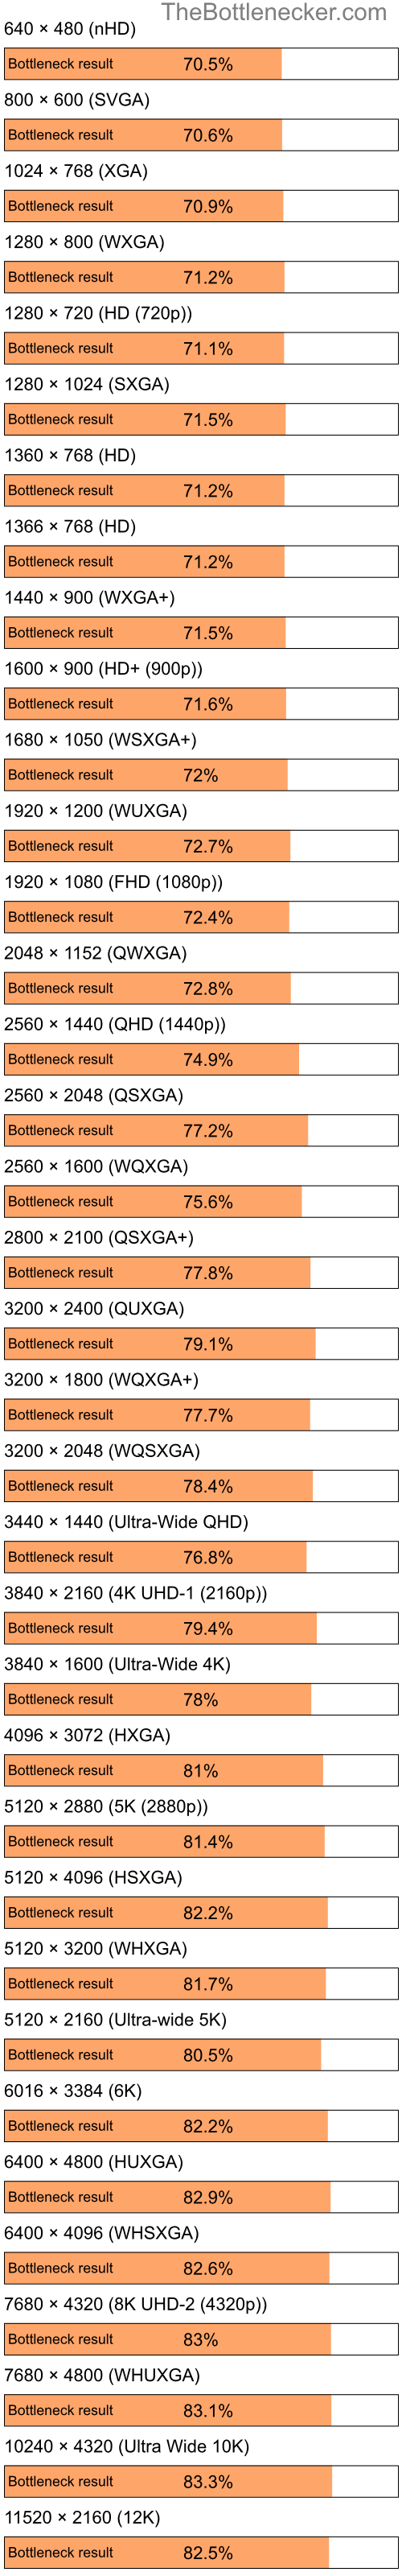 Bottleneck results by resolution for Intel Celeron and NVIDIA GeForce 9300M GS in Graphic Card Intense Tasks